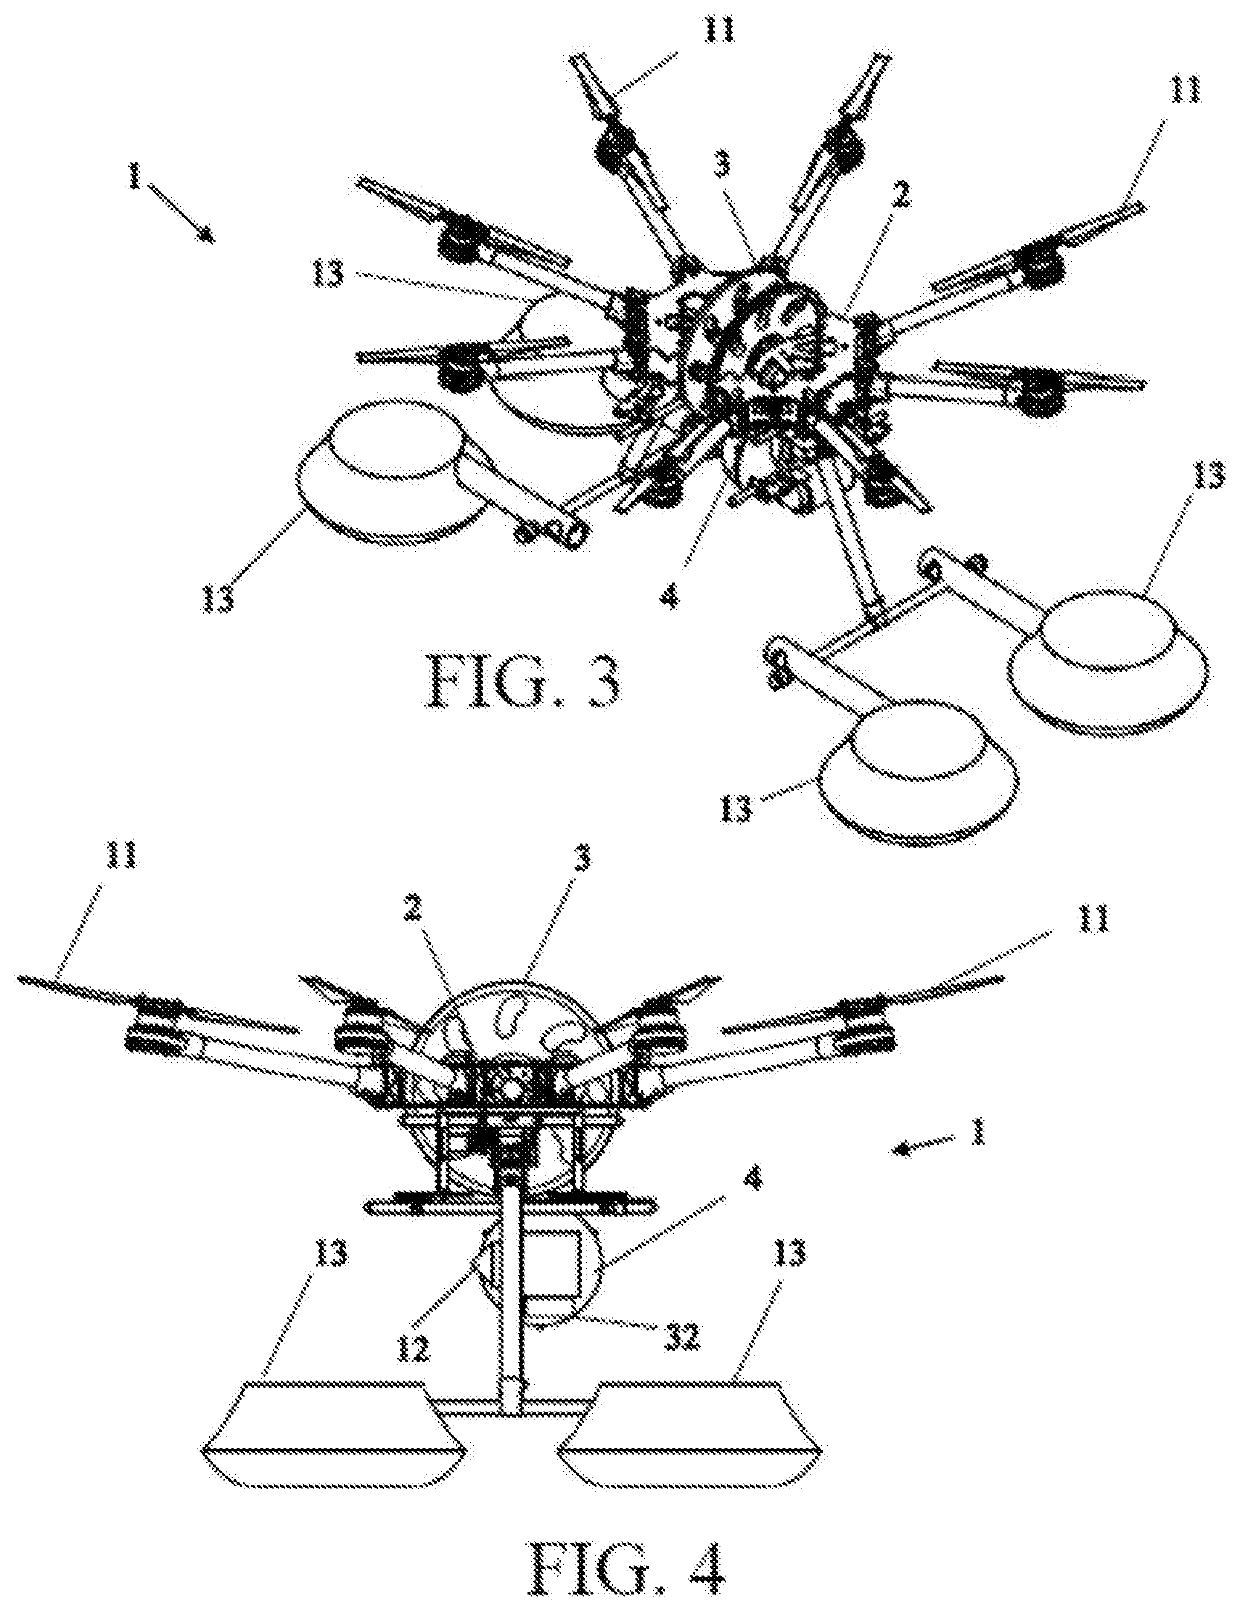 Method and Apparatus for Unmanned Aerial Maritime Float Vehicle That Sense and Report Relevant Data from Physical and Operational Environment